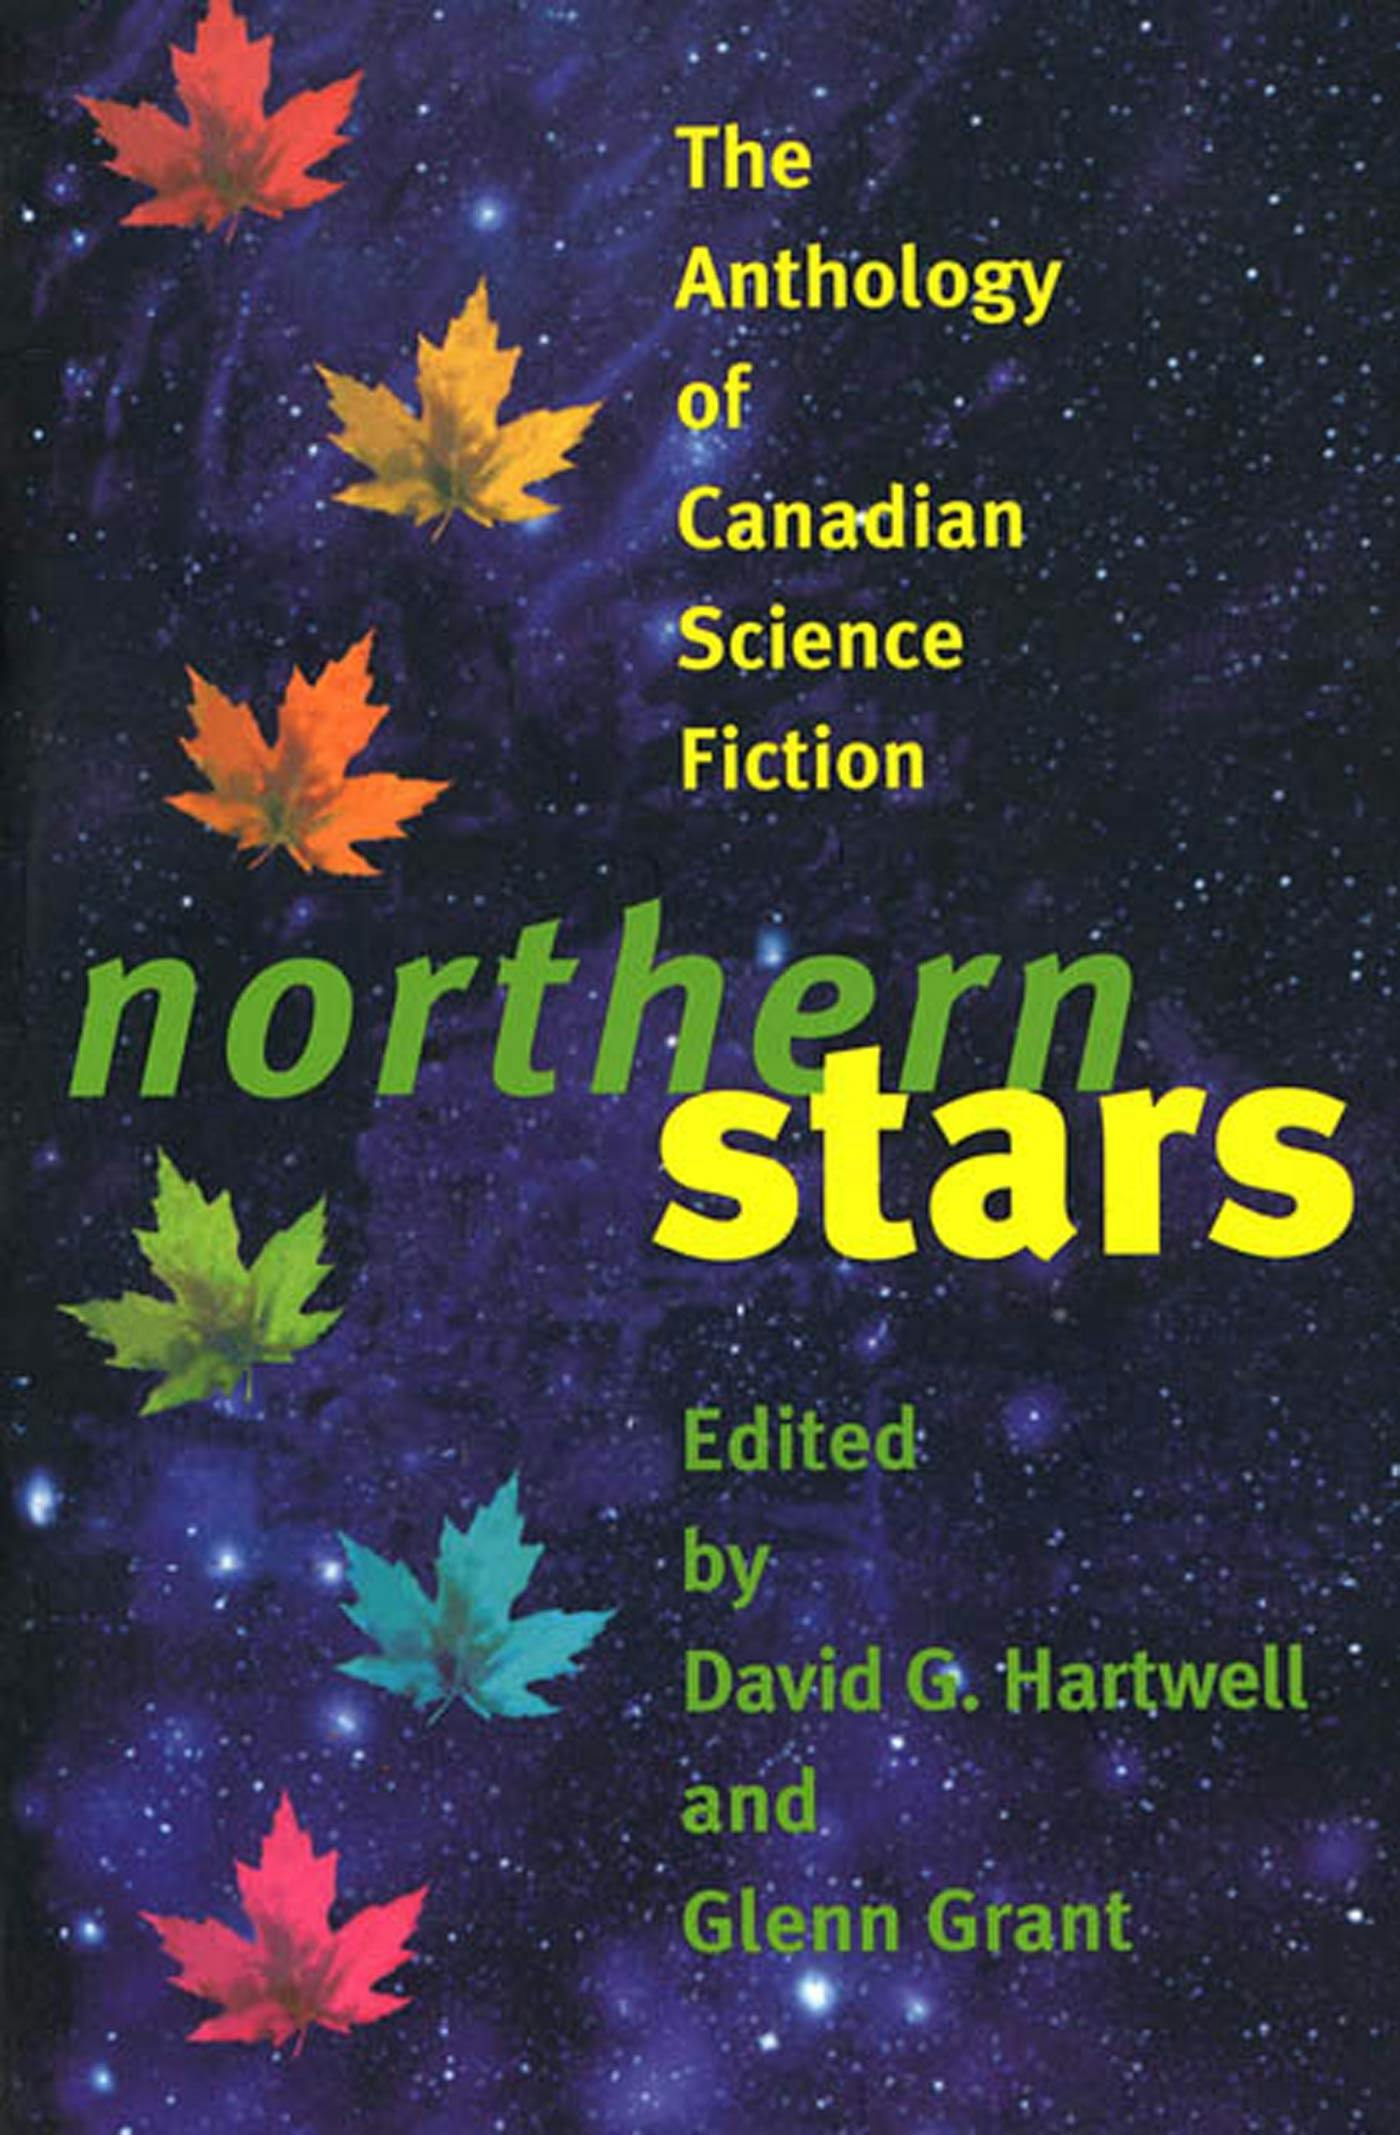 Cover for the book titled as: Northern Stars